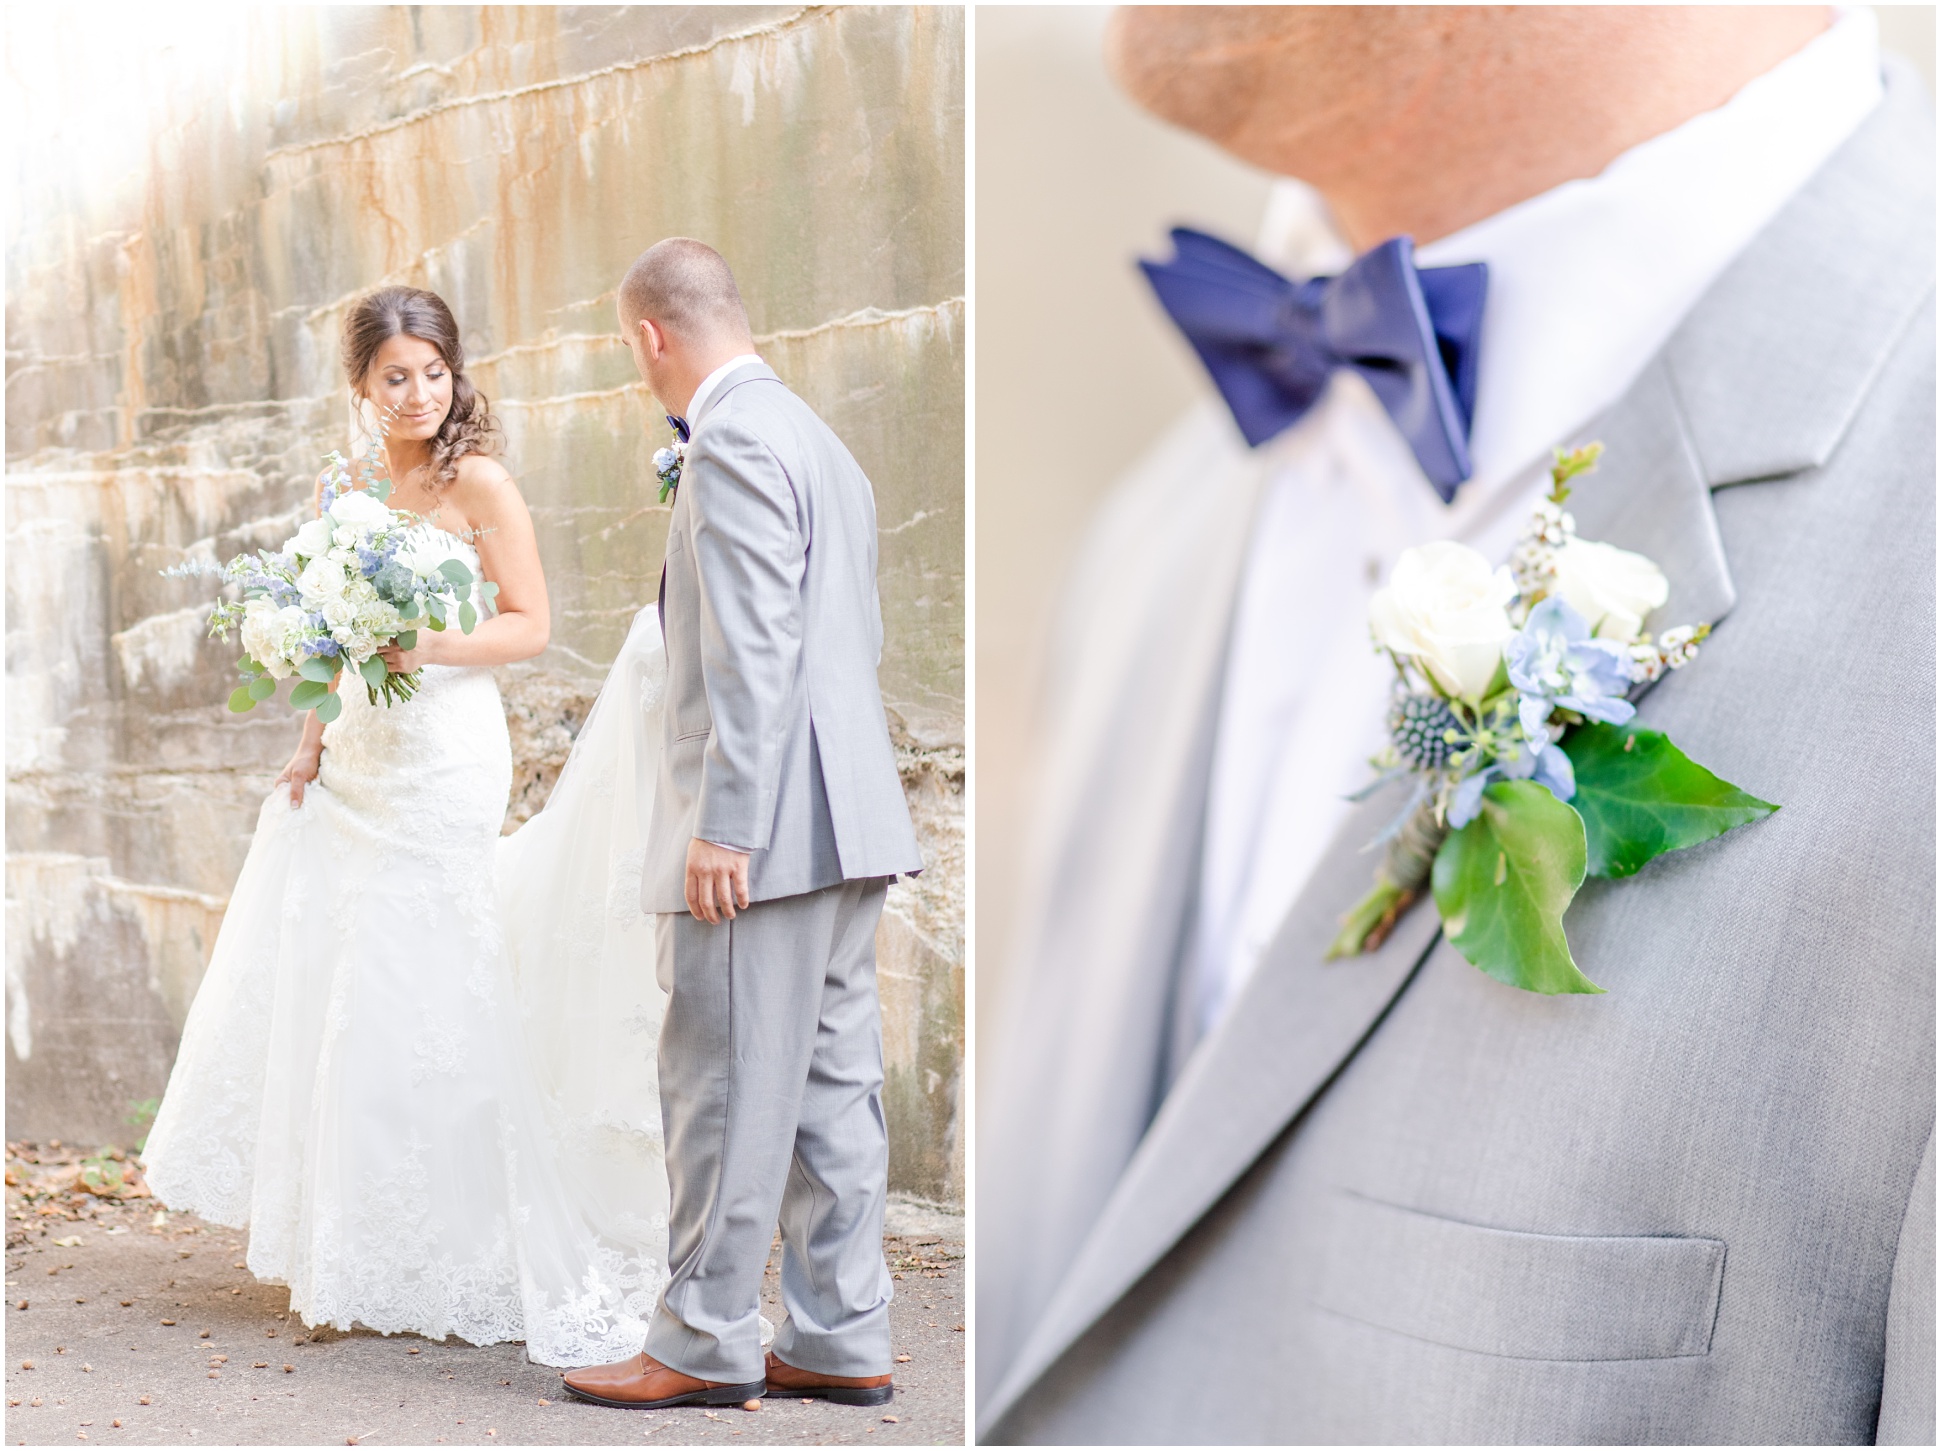 Left: Groom holding the train of his bride's dress, right: close up of groom's bow tie and boutonniere 